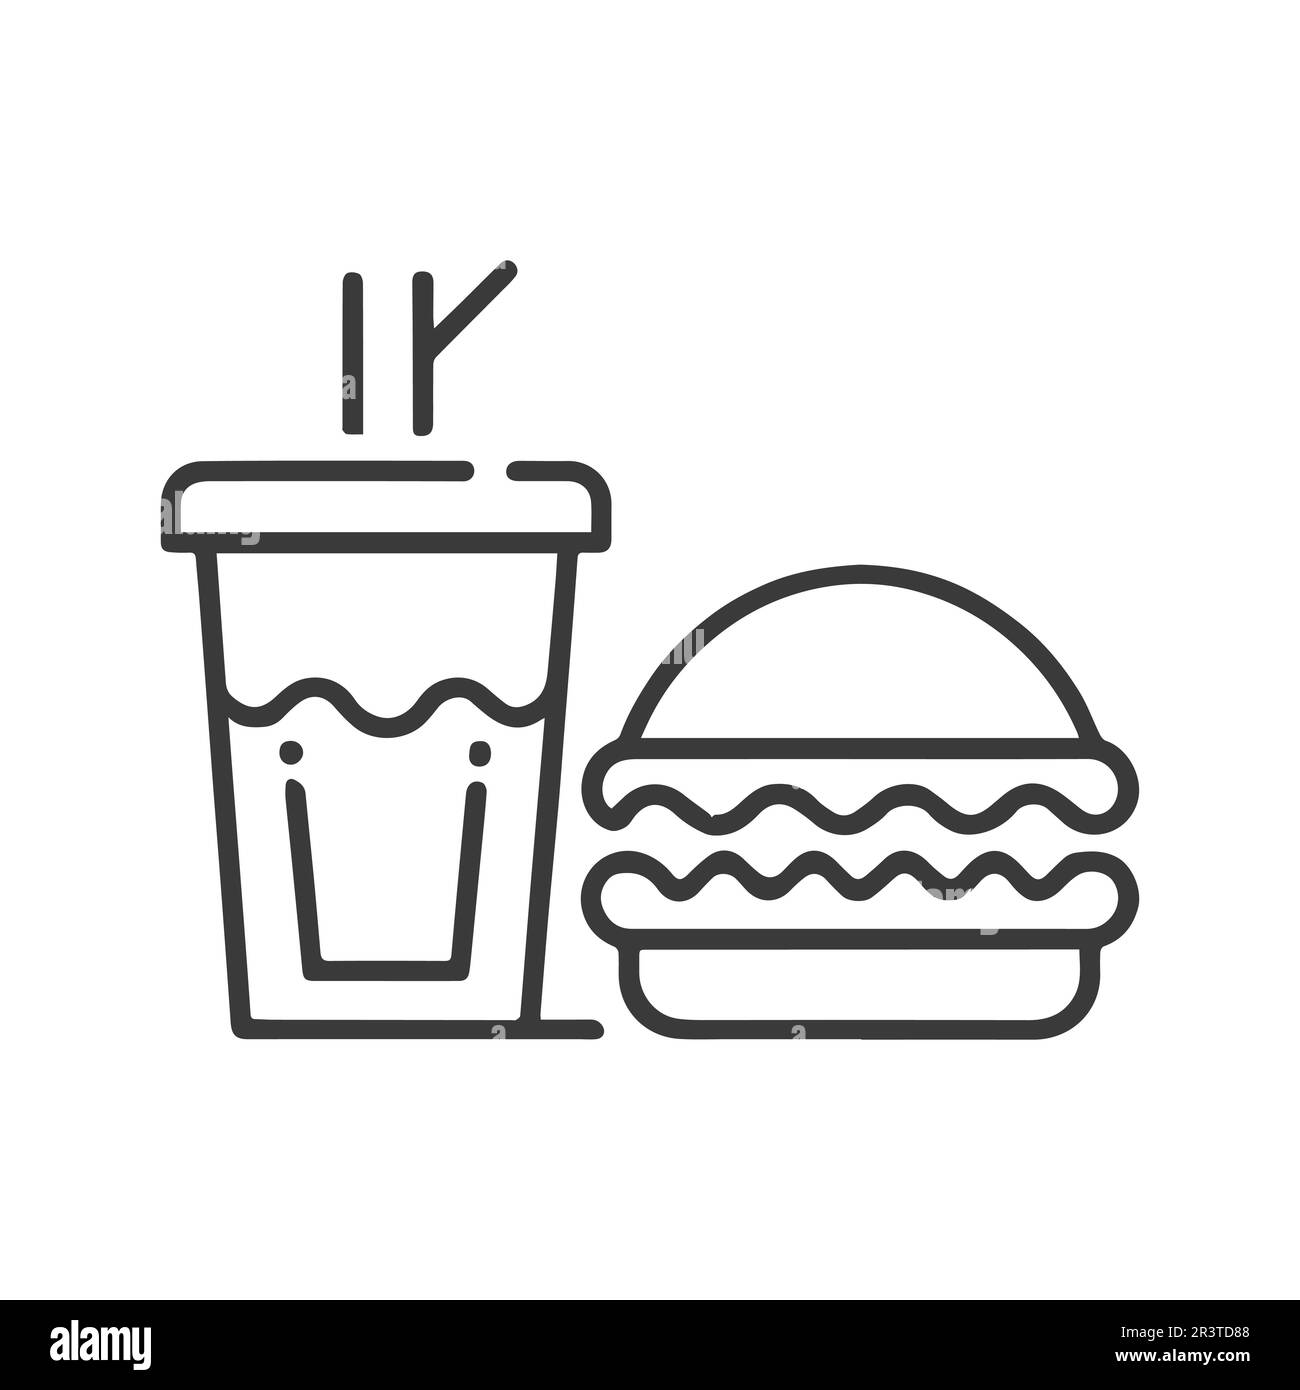 Fast food icon. Hamburger, french fries and soft drink glass, Symbols of street food. Restaurant concept. Flat design on white background. Stock Vector